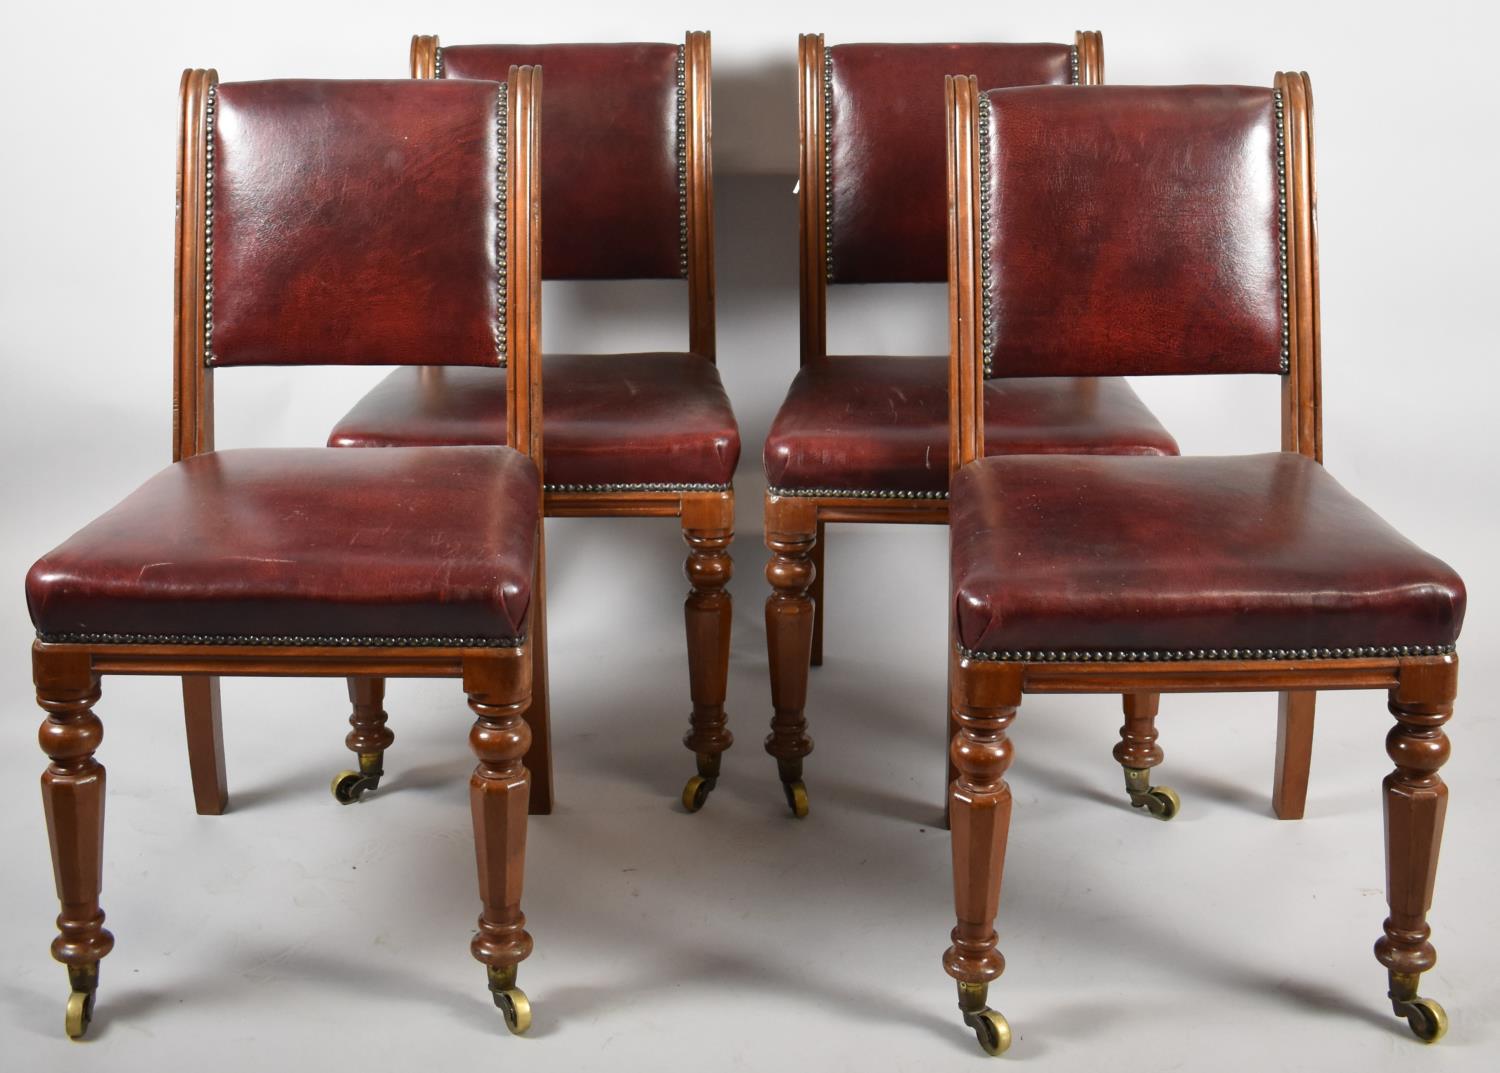 A Set of Four Hide Upholstered Mahogany Framed Edwardian Dining Chairs